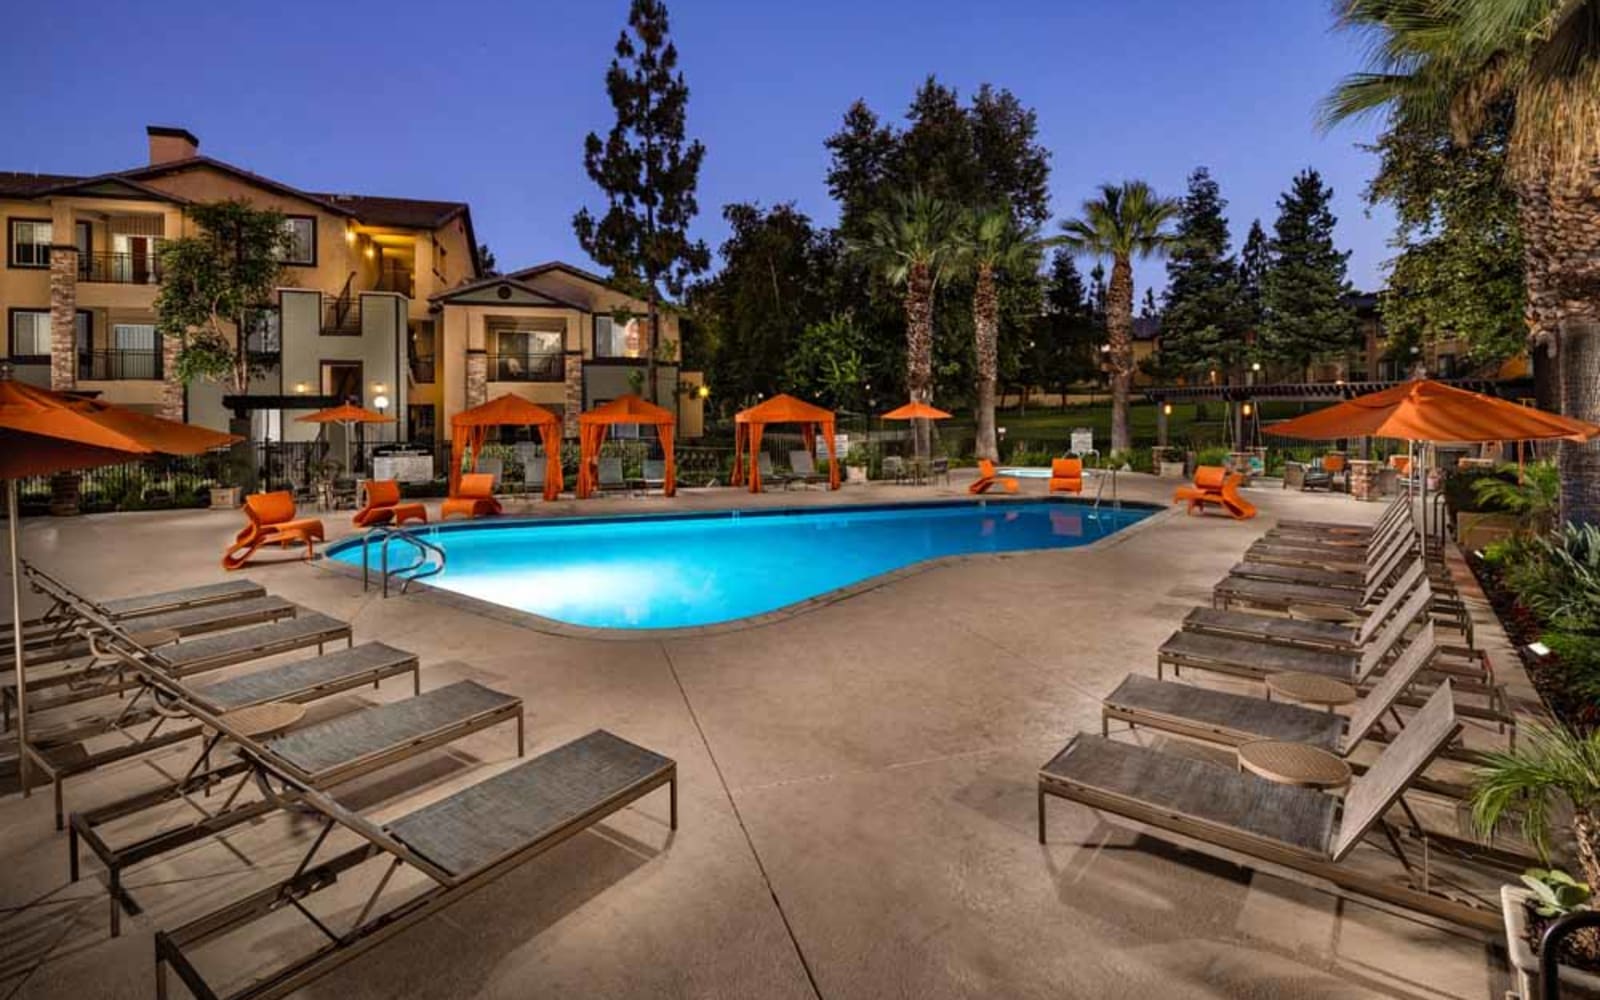 The community pool at dusk at Colonnade at Sycamore Highlands in Riverside, California